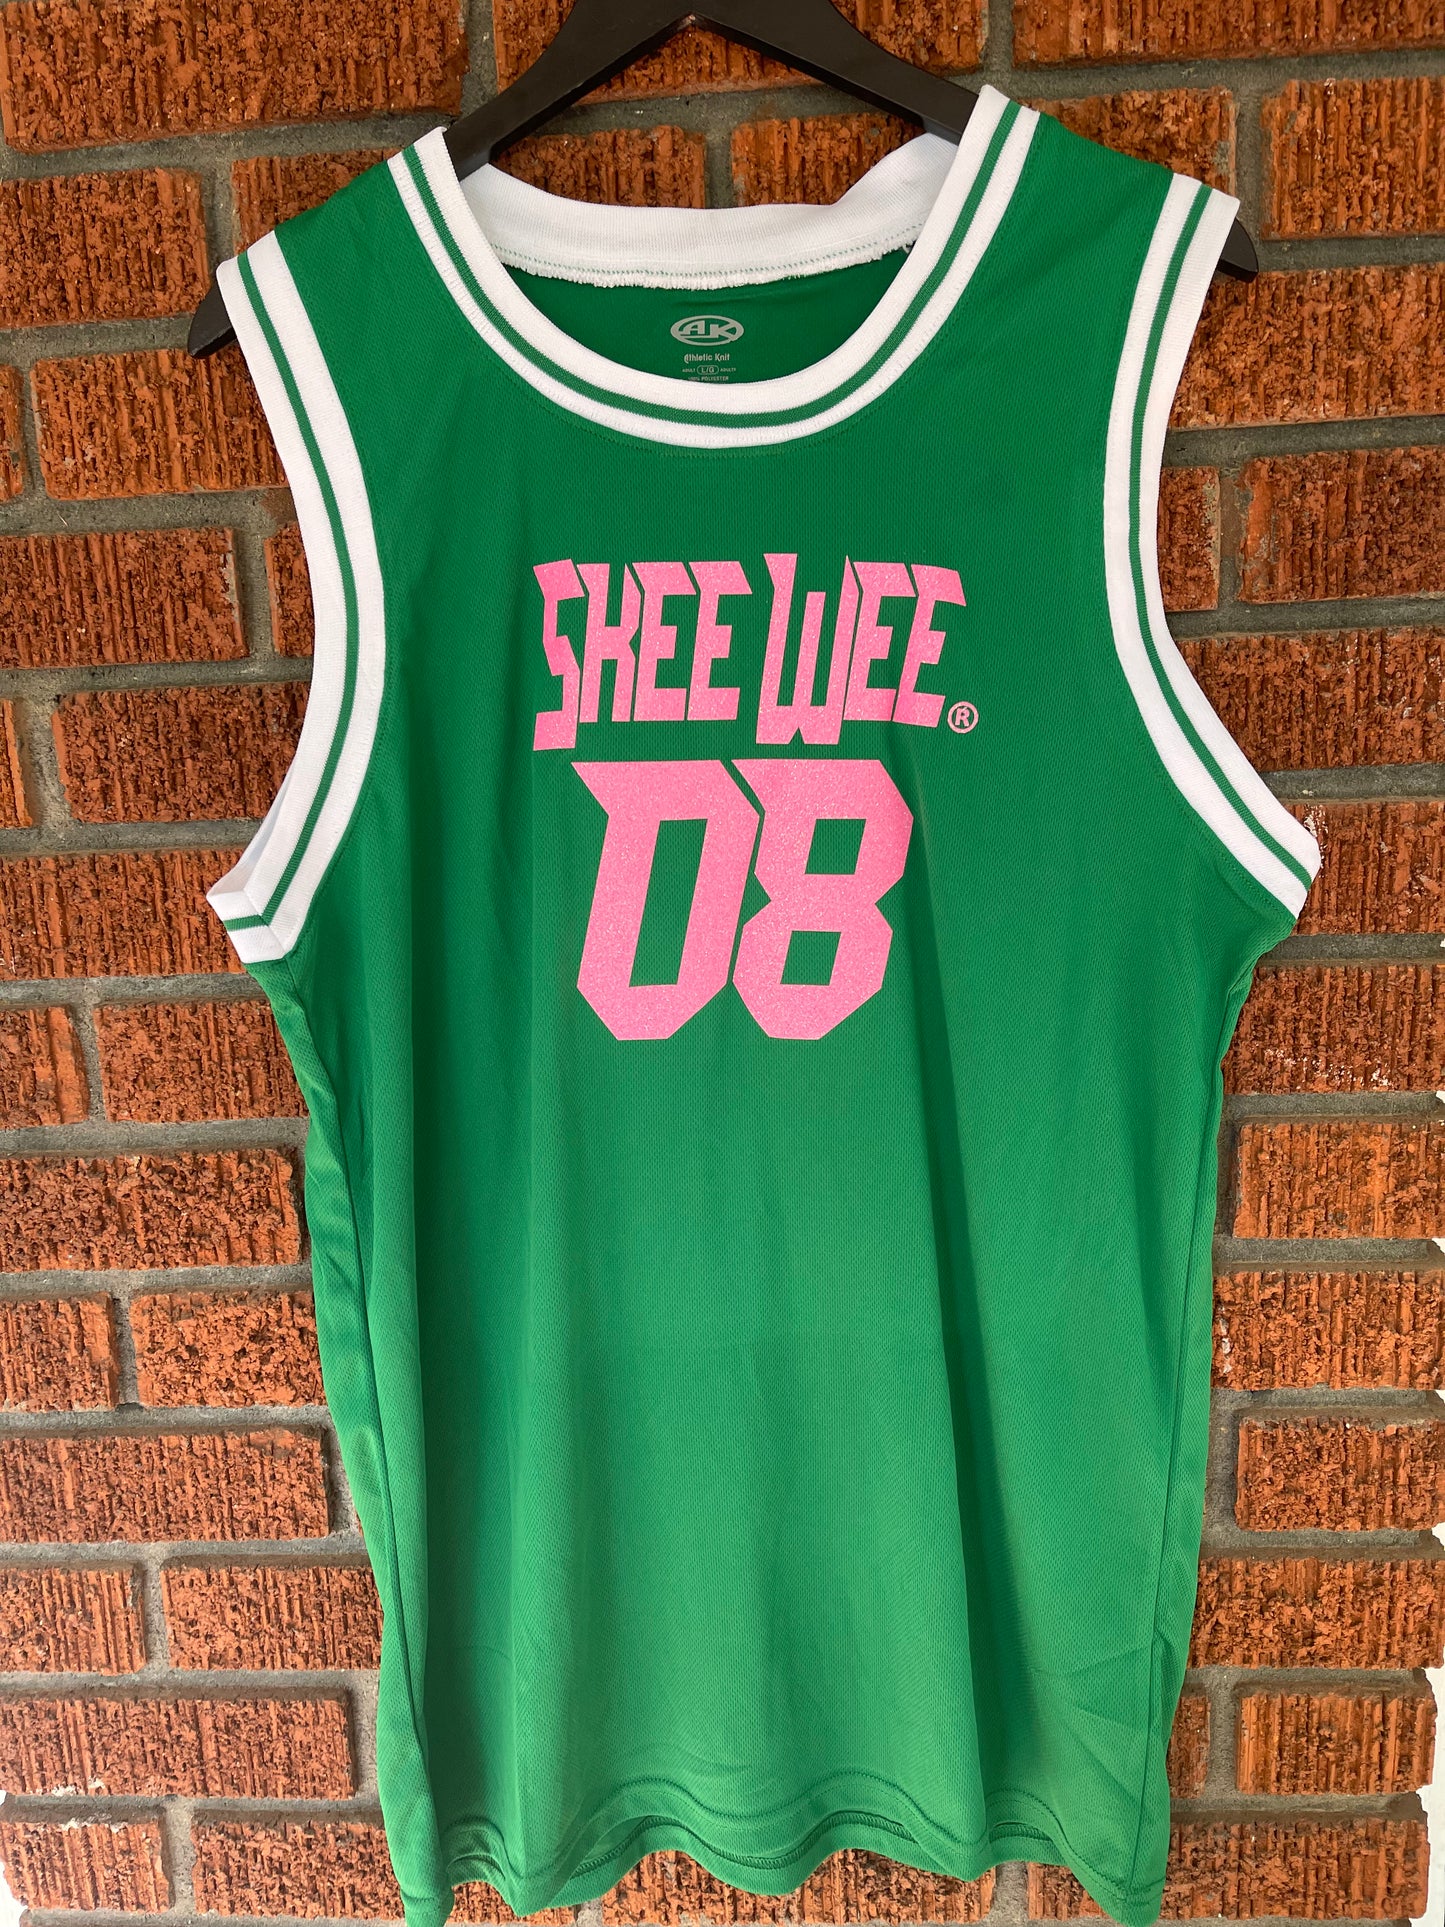 The Hot Pink AKA Skee Wee 08 Green Jersey Top